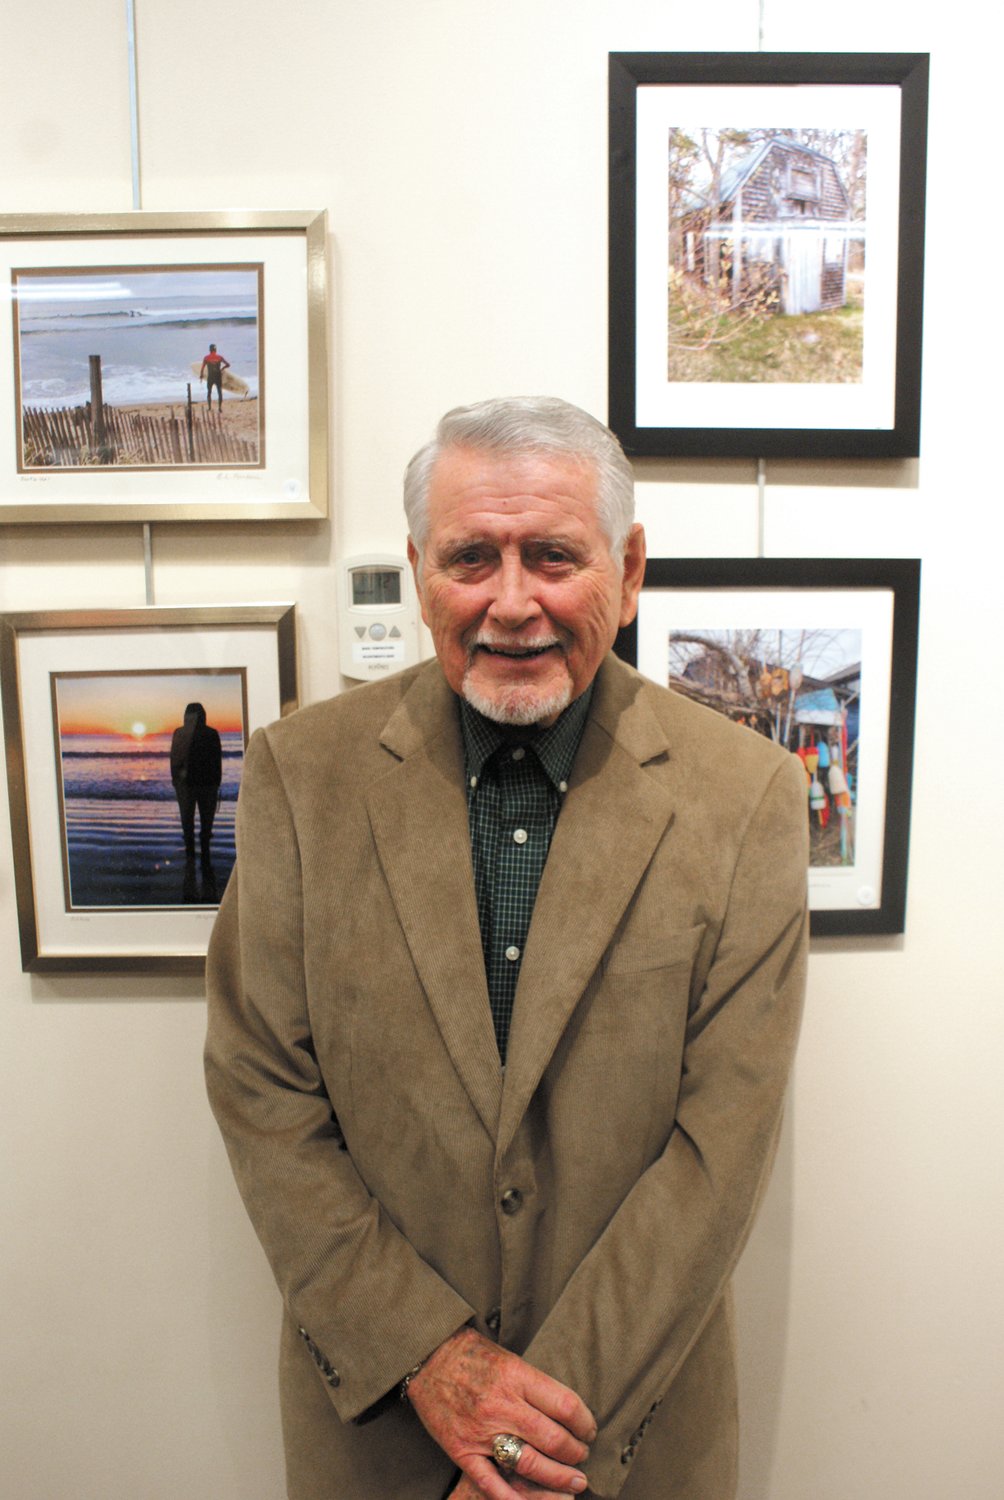 YEARS OF PHOTOS: Ed Rondeau, an Edgewood resident and retired Cranston teacher, stands by some of the photographs he’s taken over the years.